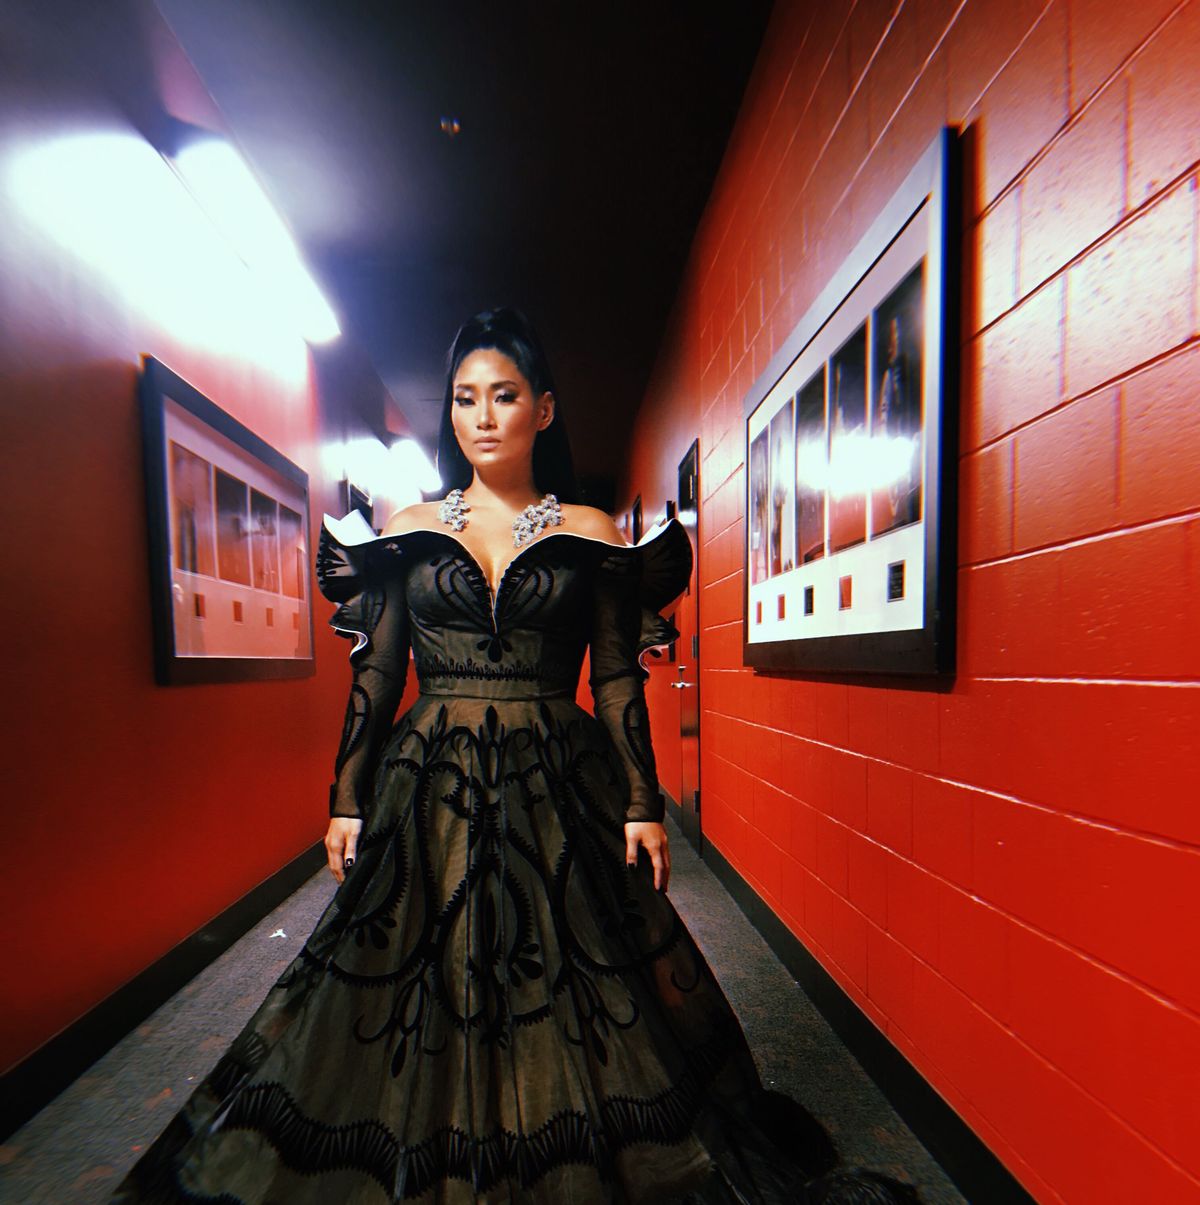 Who Is Chloe Flower? - Meet the Classical Pianist from Cardi B's Grammy ...